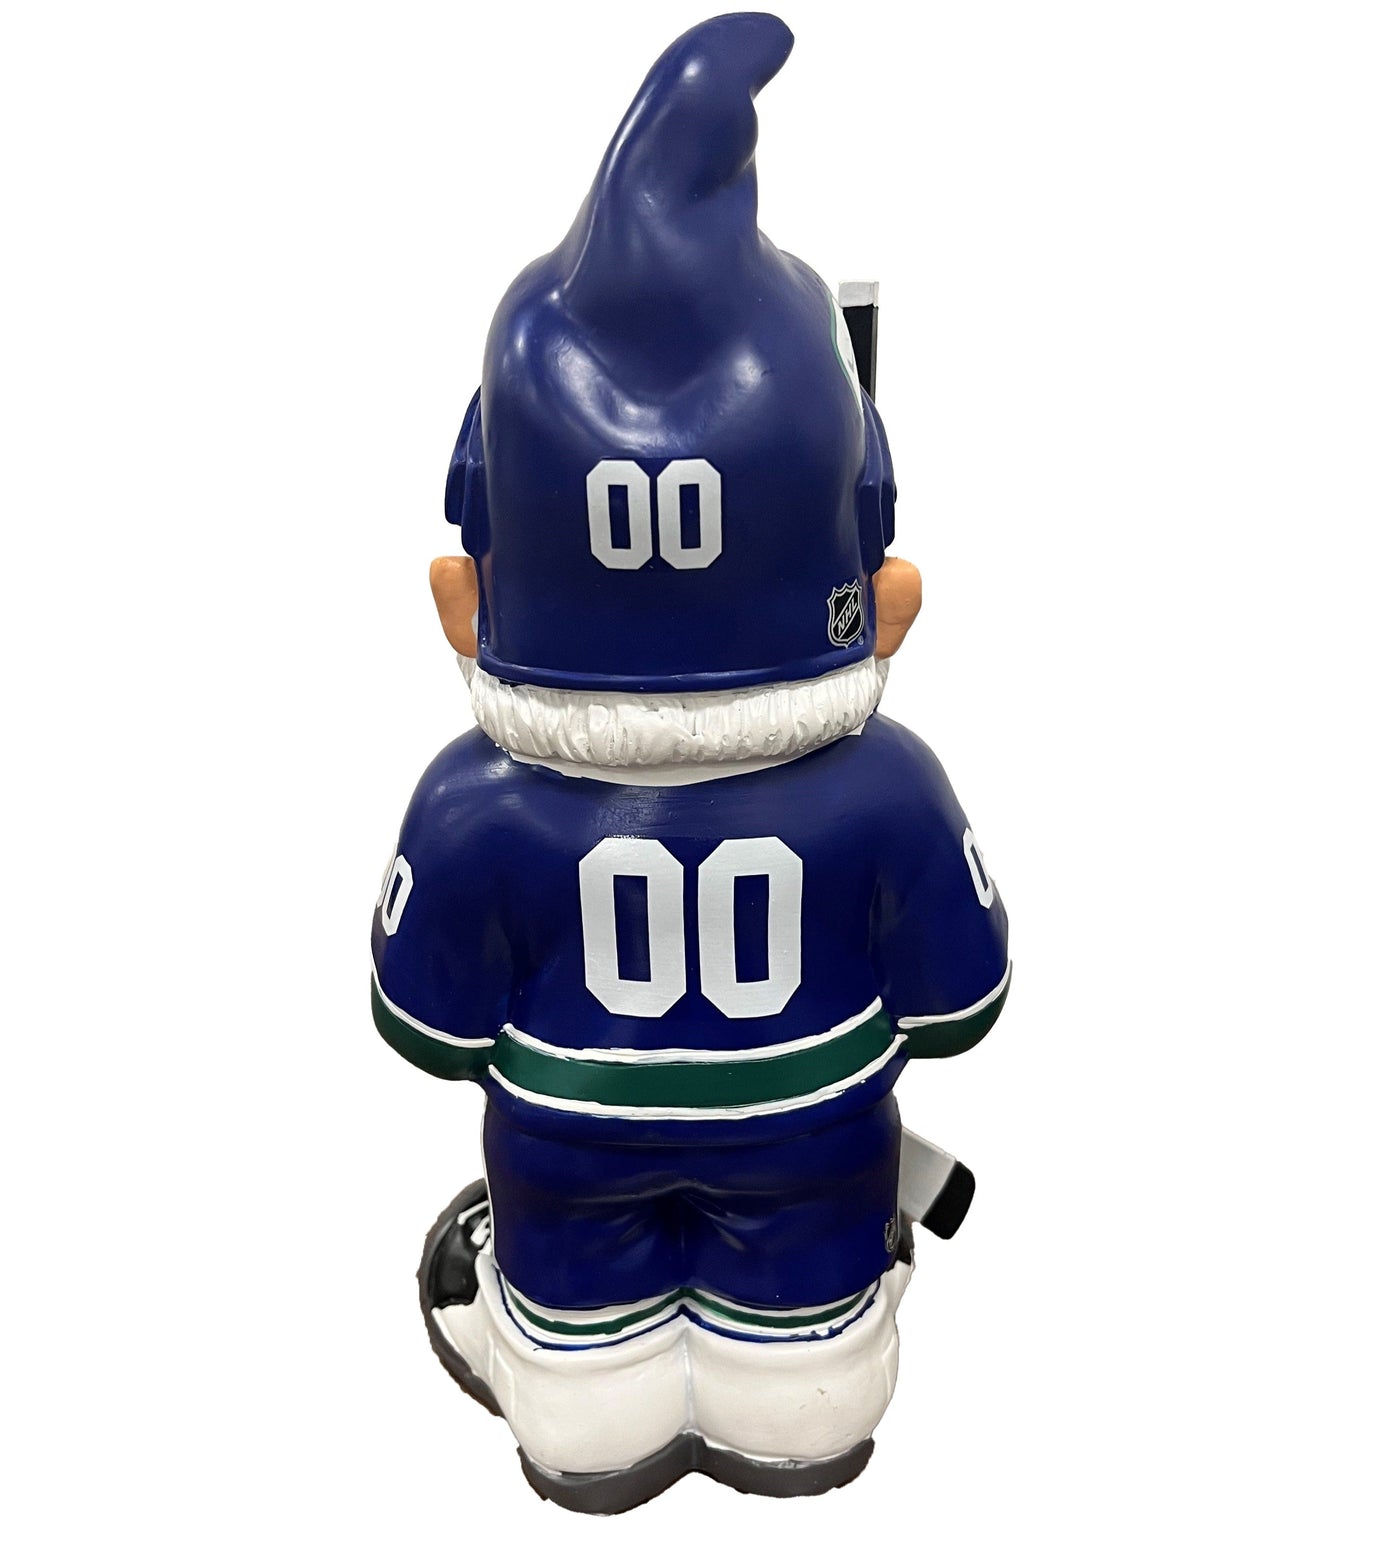 Forever Collectibles NHL Retro Gnome - Vancouver Canucks - The Hockey Shop Source For Sports